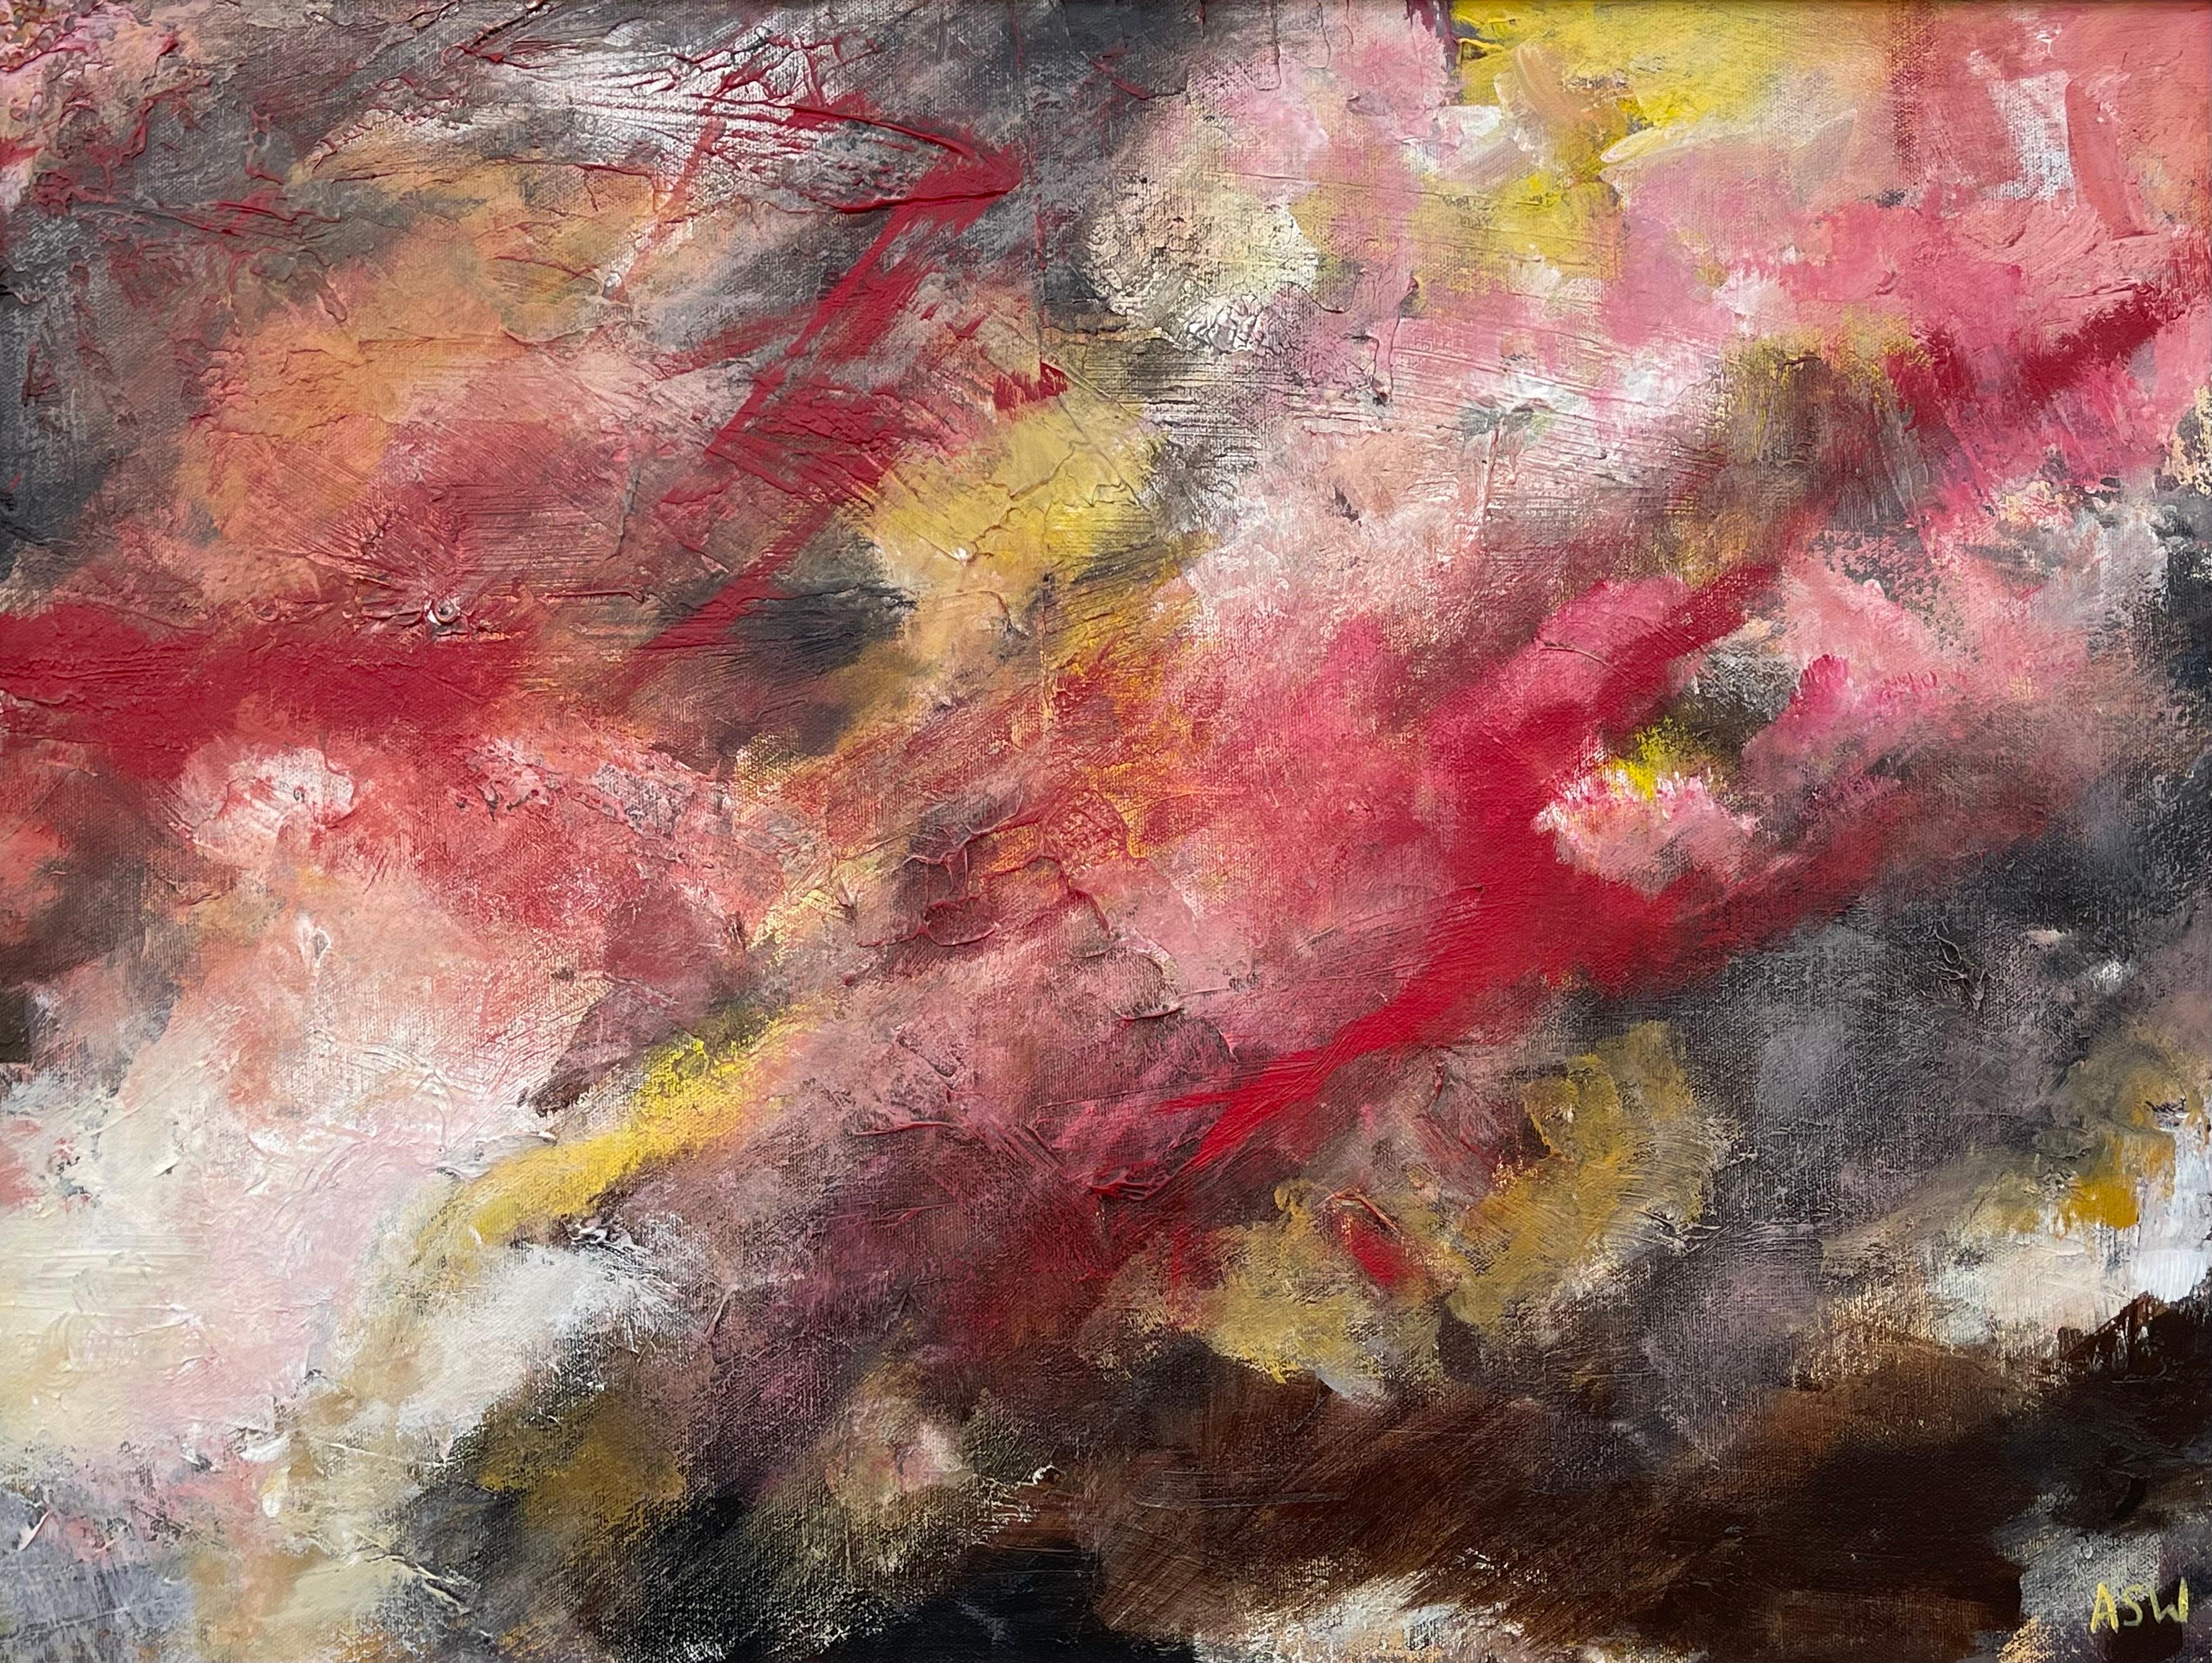 Abstract Landscape using Red, Black and Yellow by Contemporary British Artist For Sale 1